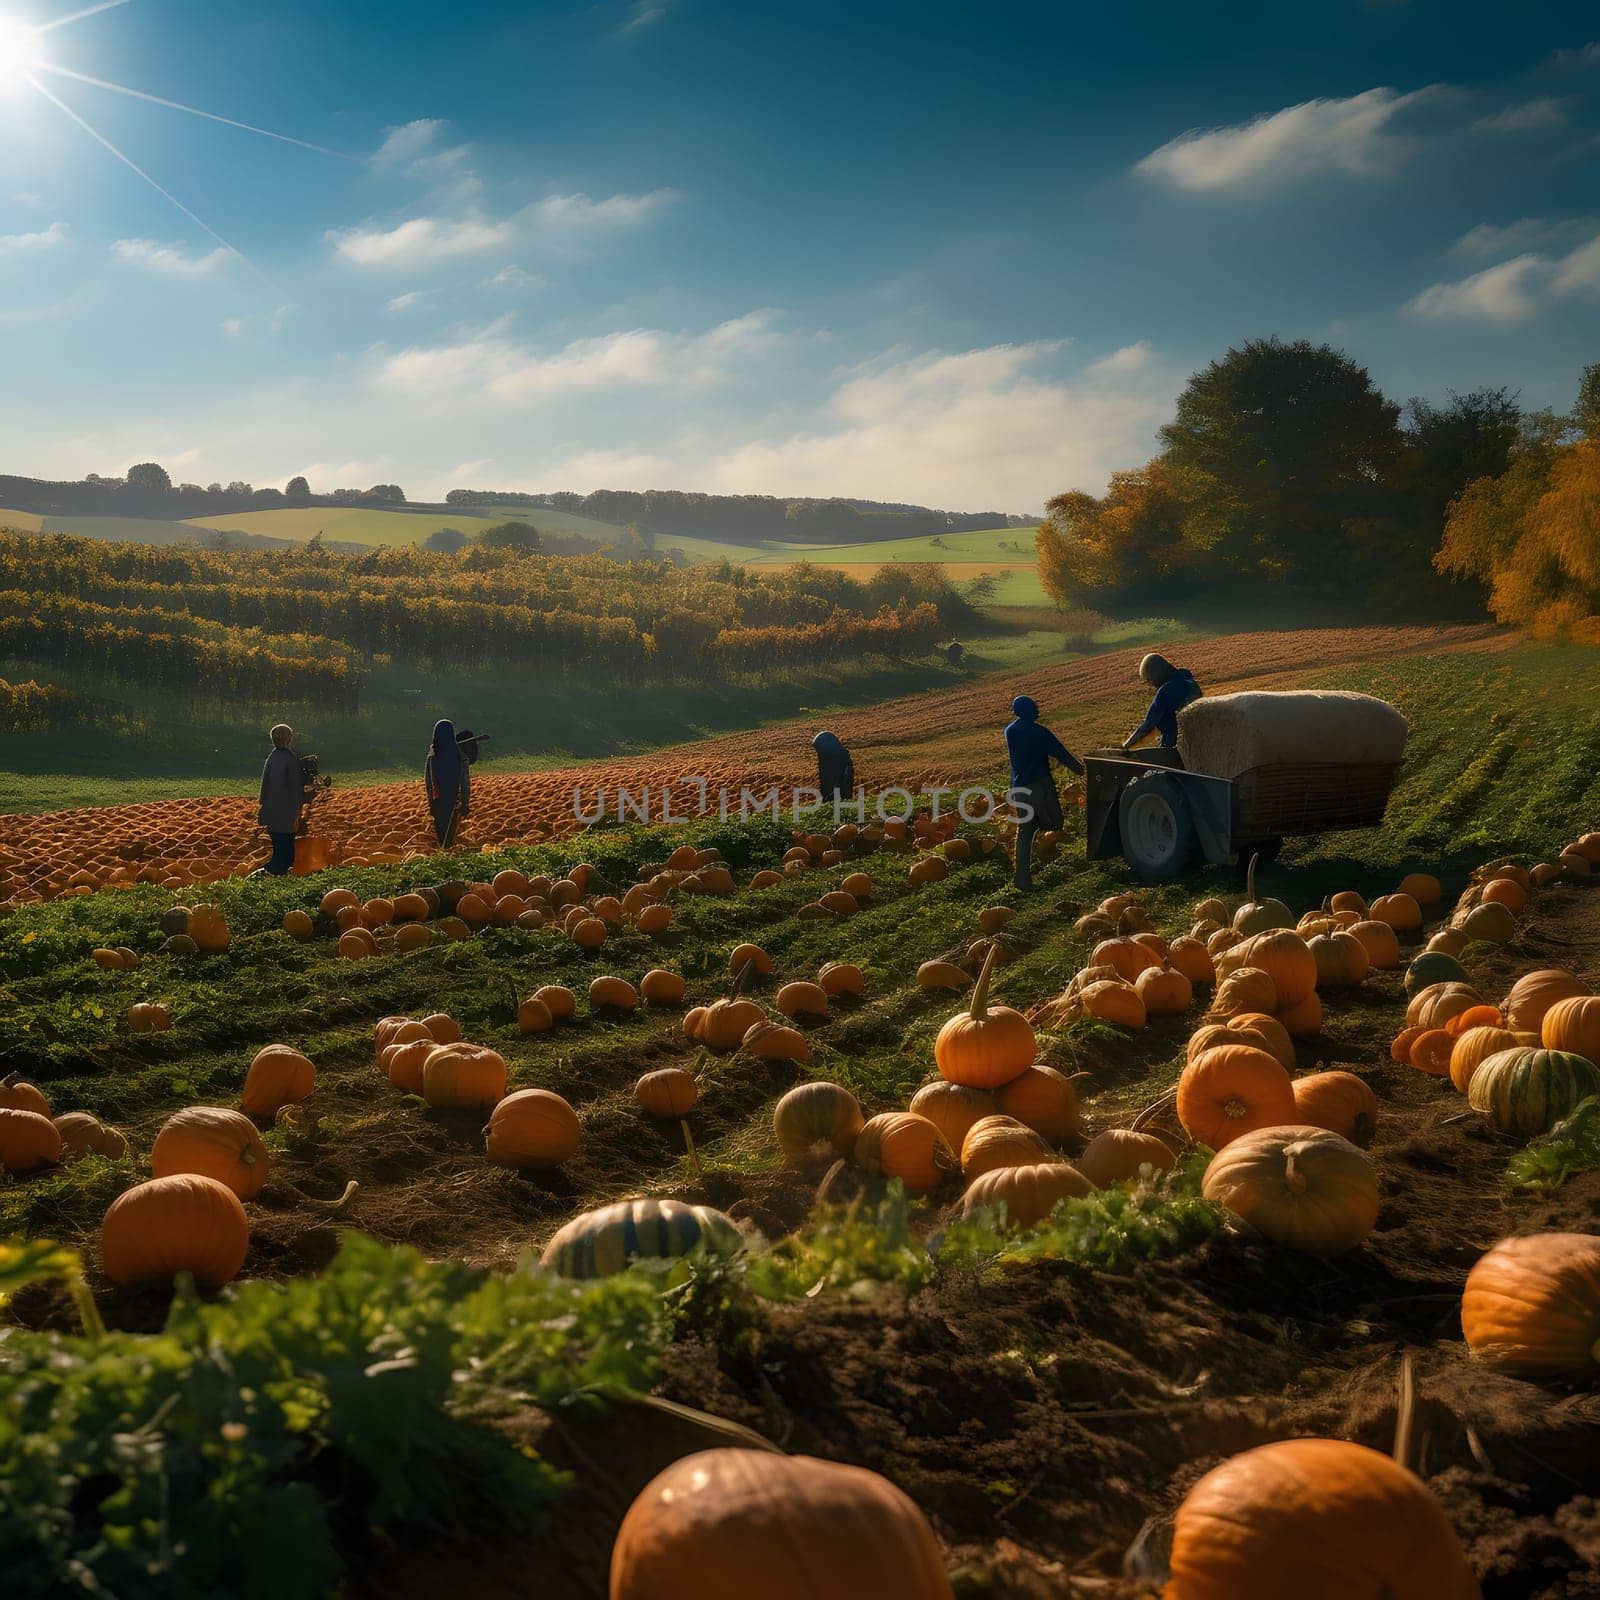 Workers working in a pumpkin field. Day. Pumpkin as a dish of thanksgiving for the harvest. An atmosphere of joy and celebration.